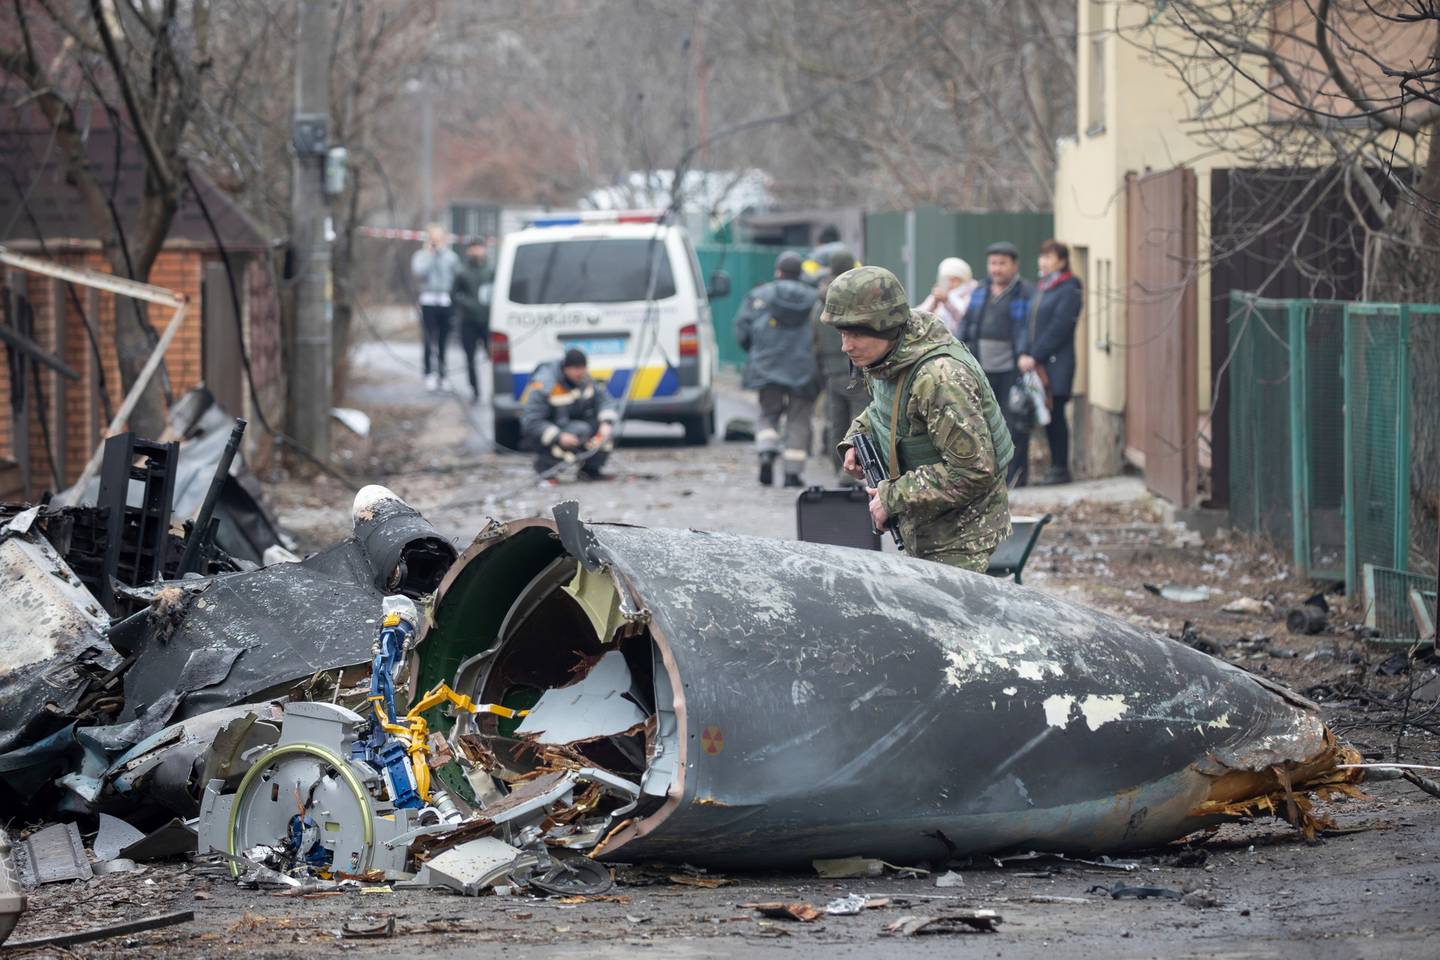 A Ukrainian Army soldier inspects fragments of a downed aircraft in Kyiv. It was unclear what aircraft crashed and what brought it down. Photo / AP